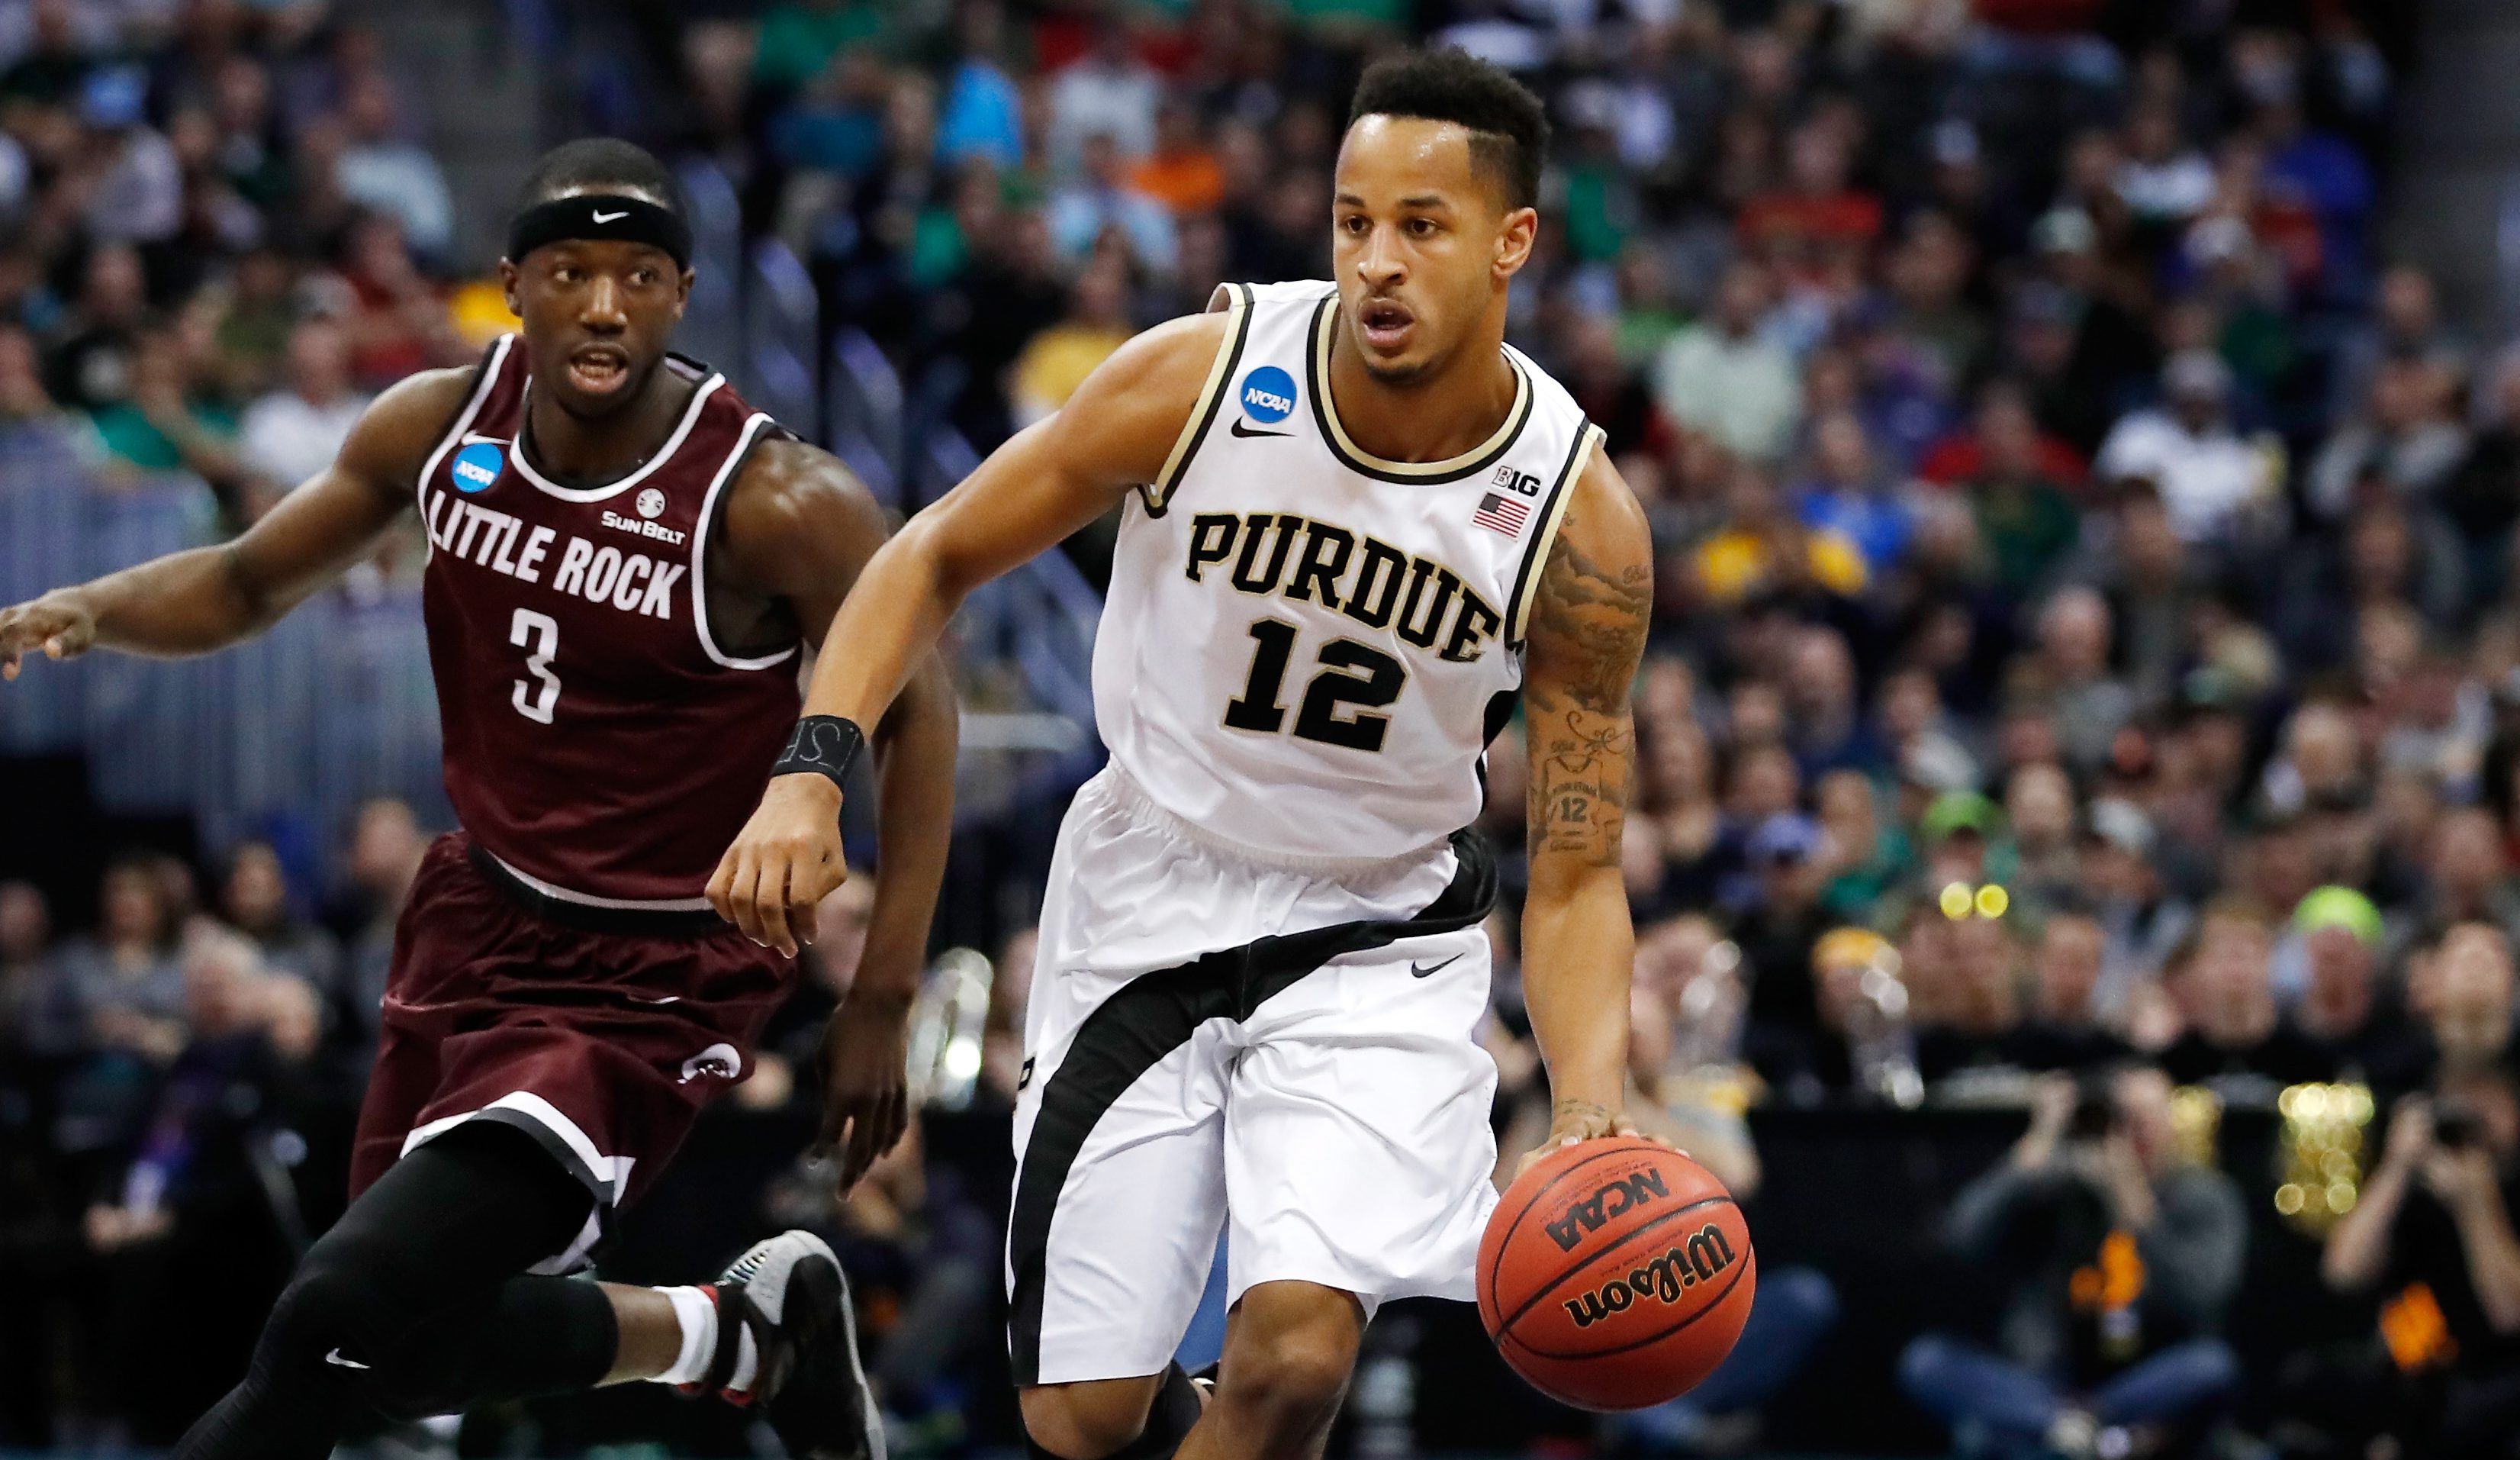 DENVER, CO - MARCH 17: Vince Edwards #12 of the Purdue Boilermakers drives the ball past Josh Hagins #3 of the Arkansas Little Rock Trojans during the first round of the 2016 NCAA Men's Basketball Tournament at the Pepsi Center on March 17, 2016 in Denver, Colorado. (Photo by Justin Edmonds/Getty Images)